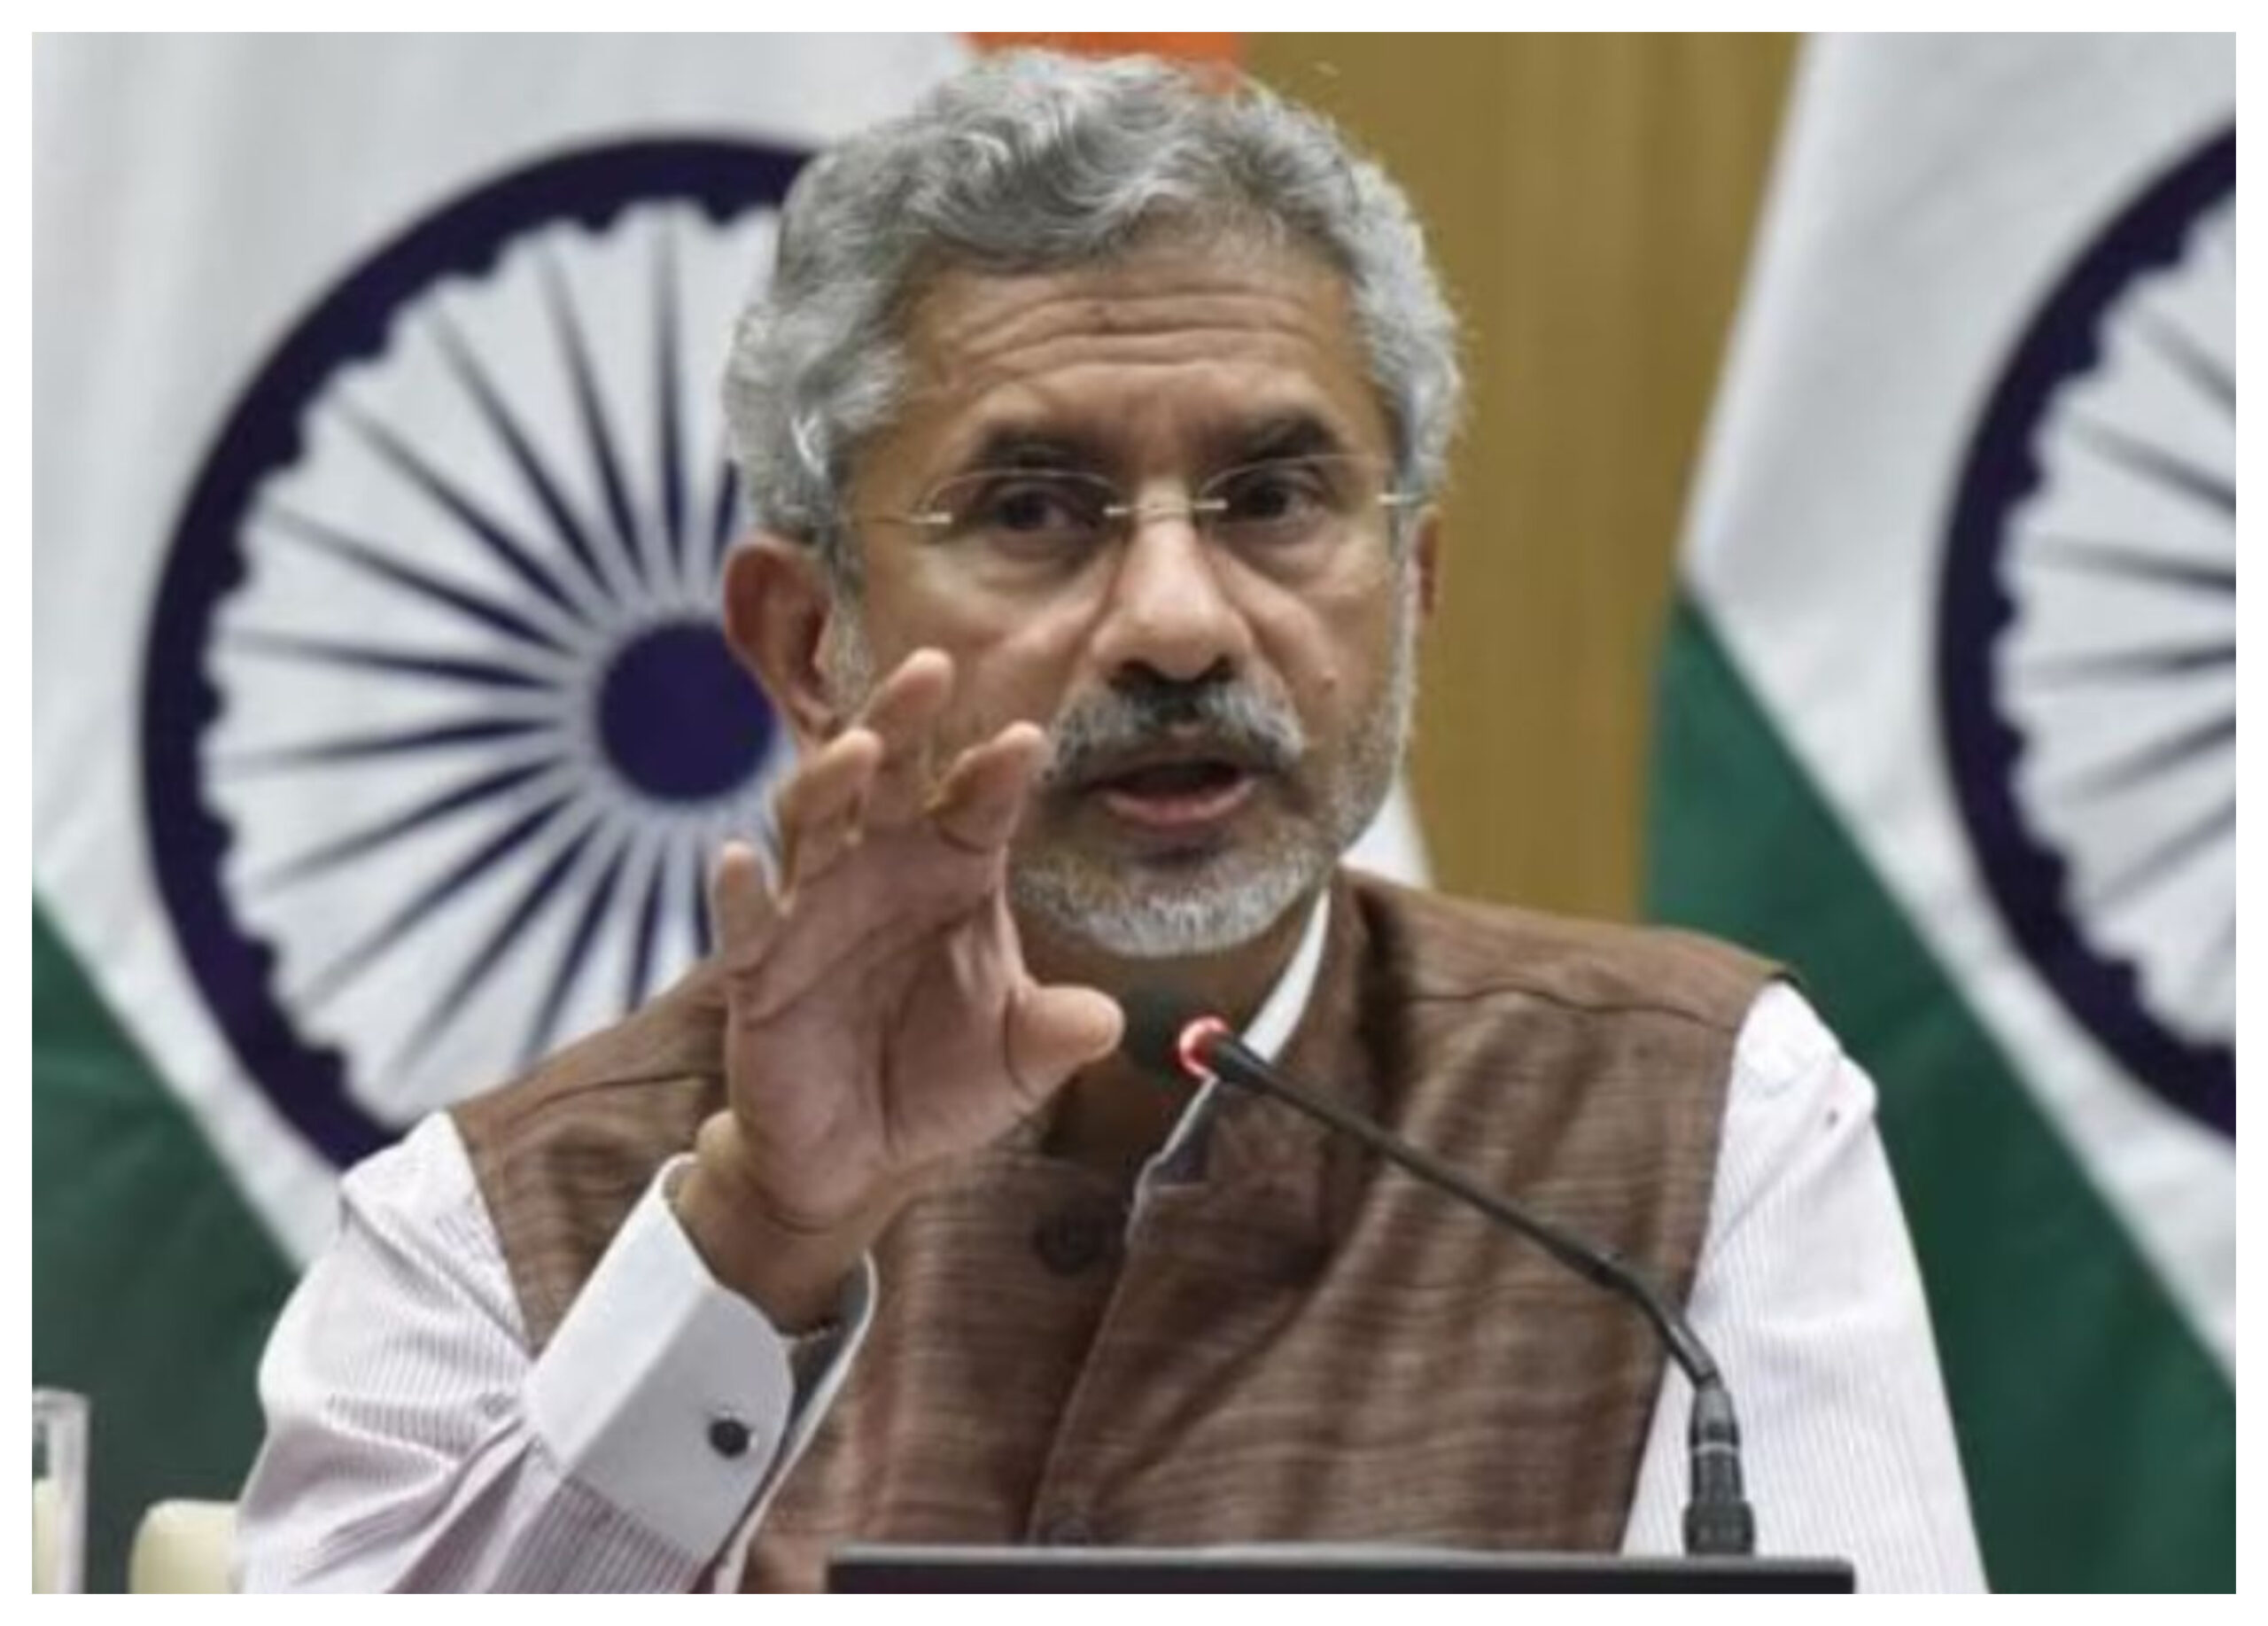 Hyderabad: Foreign Minister S. Jaishankar said UPA government did not take any military action after Mumbai attacks